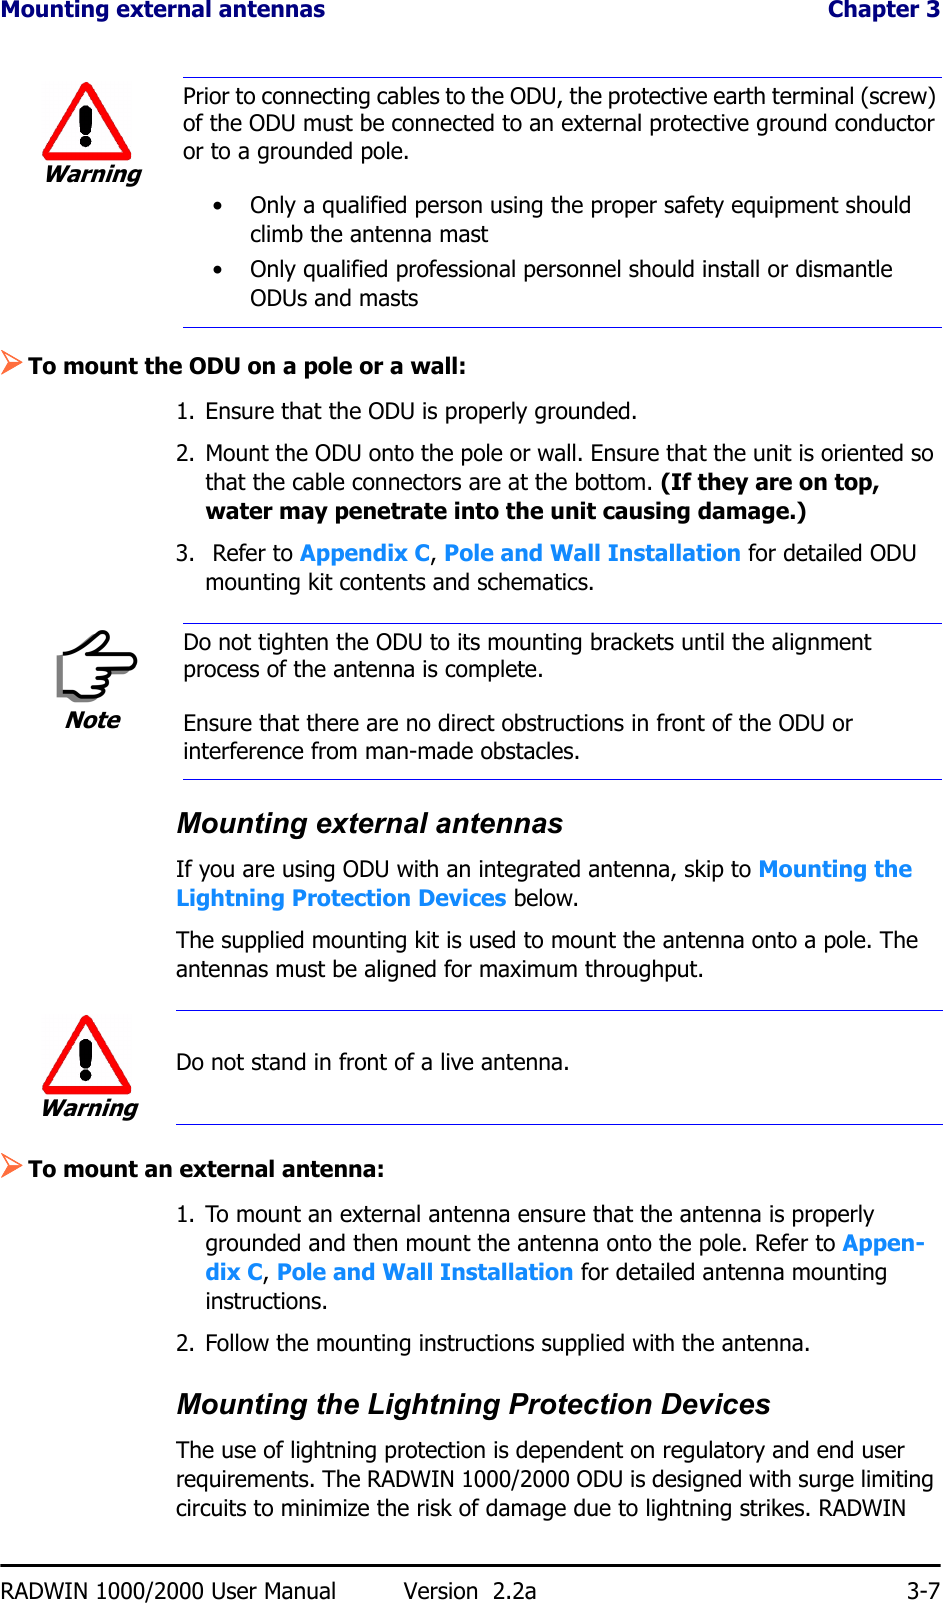 Mounting external antennas  Chapter 3RADWIN 1000/2000 User Manual Version  2.2a 3-7¾To mount the ODU on a pole or a wall:1. Ensure that the ODU is properly grounded.2. Mount the ODU onto the pole or wall. Ensure that the unit is oriented so that the cable connectors are at the bottom. (If they are on top, water may penetrate into the unit causing damage.)3.  Refer to Appendix C, Pole and Wall Installation for detailed ODU mounting kit contents and schematics.Mounting external antennasIf you are using ODU with an integrated antenna, skip to Mounting the Lightning Protection Devices below.The supplied mounting kit is used to mount the antenna onto a pole. The antennas must be aligned for maximum throughput.¾To mount an external antenna:1. To mount an external antenna ensure that the antenna is properly grounded and then mount the antenna onto the pole. Refer to Appen-dix C, Pole and Wall Installation for detailed antenna mounting instructions.2. Follow the mounting instructions supplied with the antenna.Mounting the Lightning Protection DevicesThe use of lightning protection is dependent on regulatory and end user requirements. The RADWIN 1000/2000 ODU is designed with surge limiting circuits to minimize the risk of damage due to lightning strikes. RADWIN WarningPrior to connecting cables to the ODU, the protective earth terminal (screw) of the ODU must be connected to an external protective ground conductor or to a grounded pole. • Only a qualified person using the proper safety equipment should climb the antenna mast• Only qualified professional personnel should install or dismantle ODUs and mastsNoteDo not tighten the ODU to its mounting brackets until the alignment process of the antenna is complete.Ensure that there are no direct obstructions in front of the ODU or interference from man-made obstacles.WarningDo not stand in front of a live antenna.